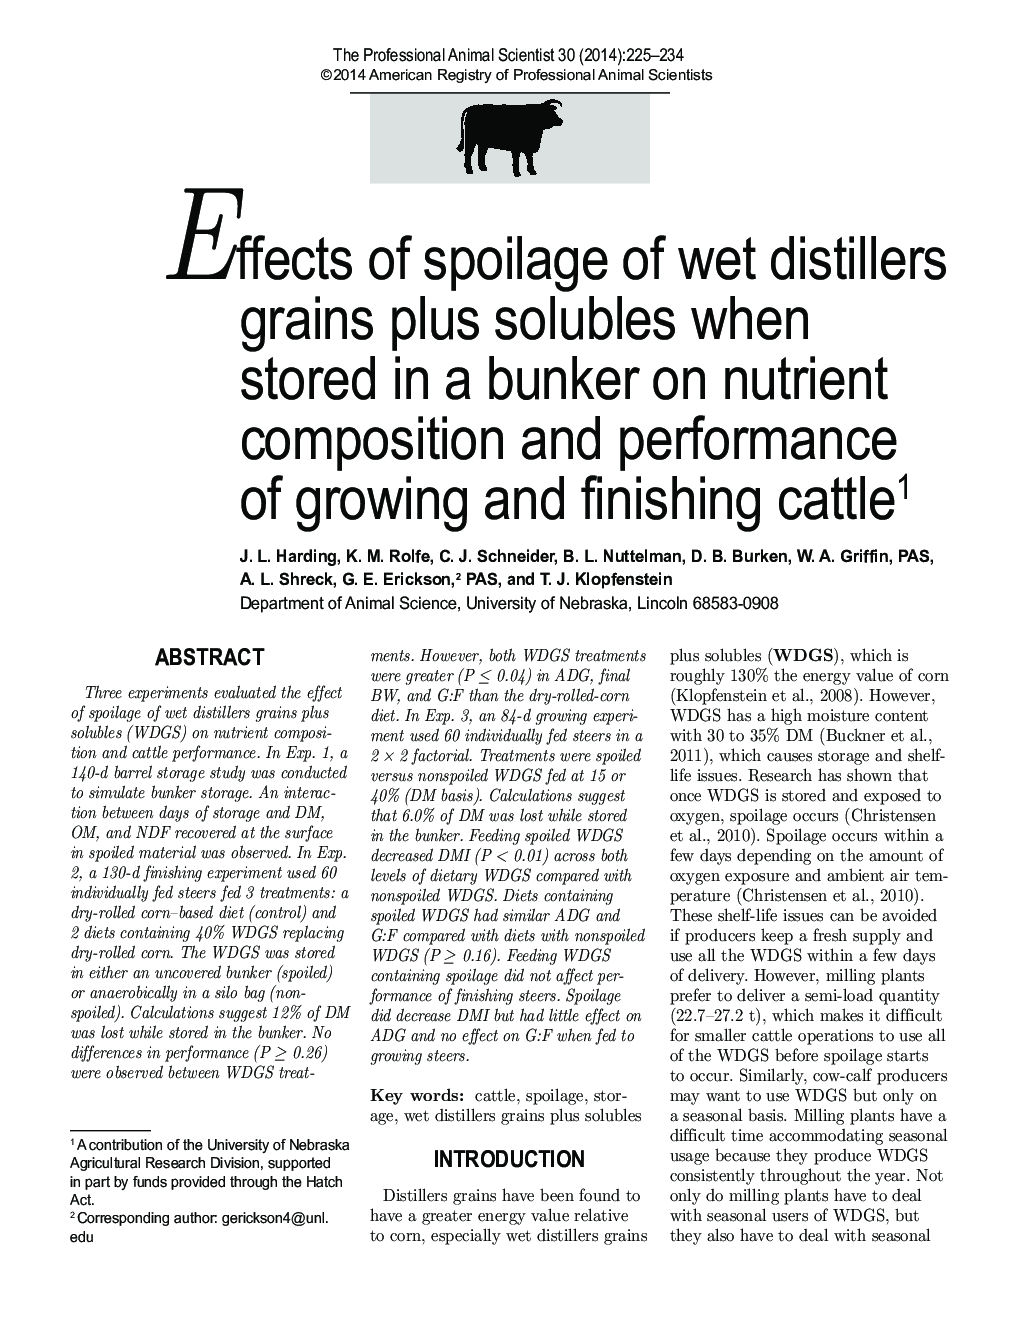 Effects of spoilage of wet distillers grains plus solubles when stored in a bunker on nutrient composition and performance of growing and finishing cattle1